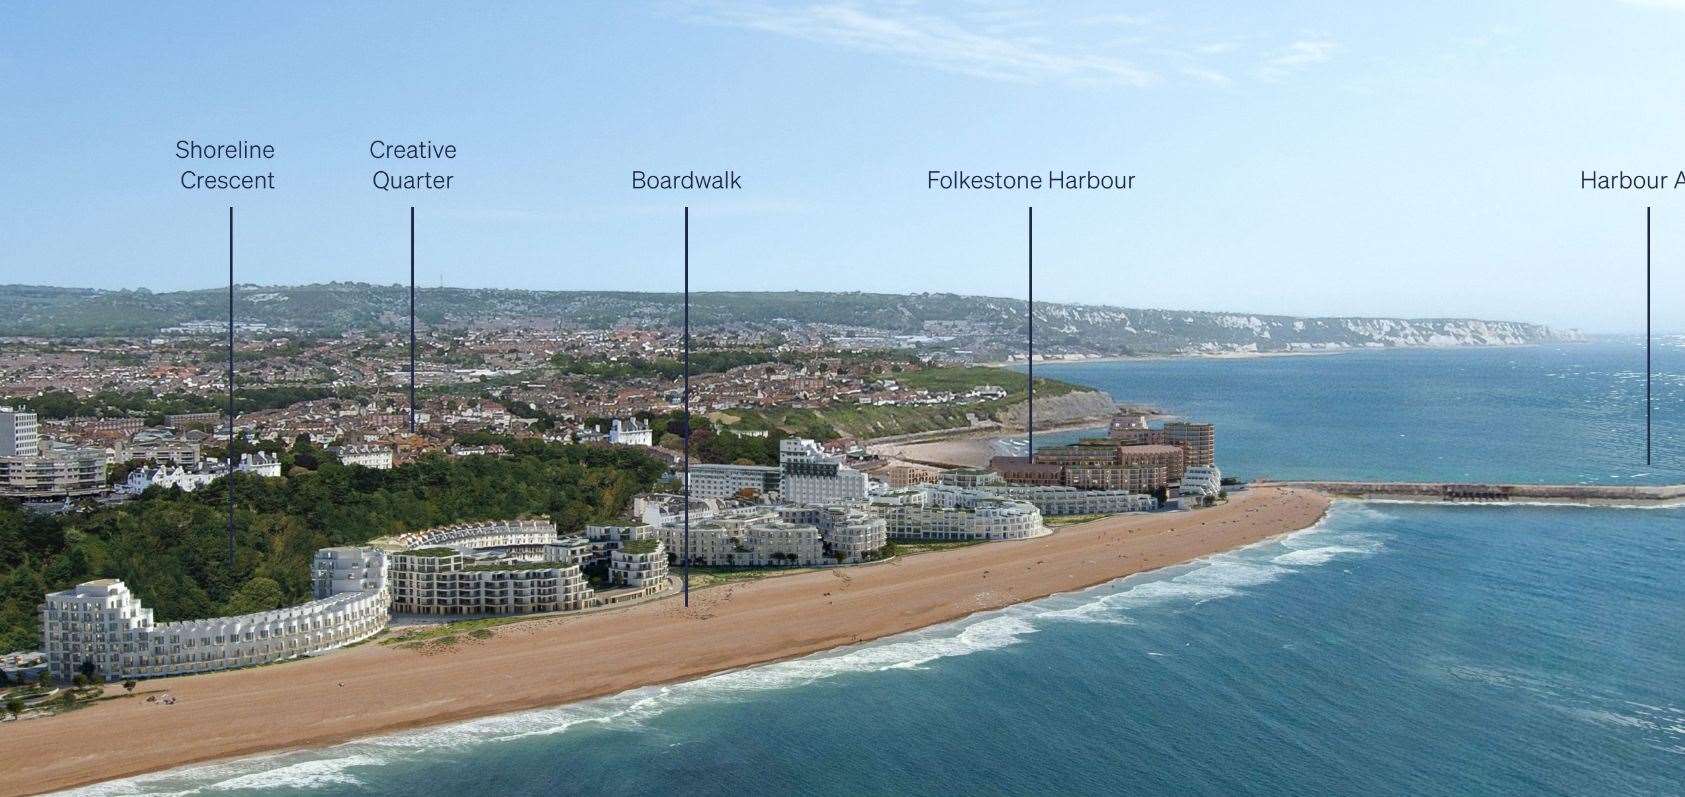 How the overall masterplan for the town’s coastline could look once completed. Picture: Shoreline